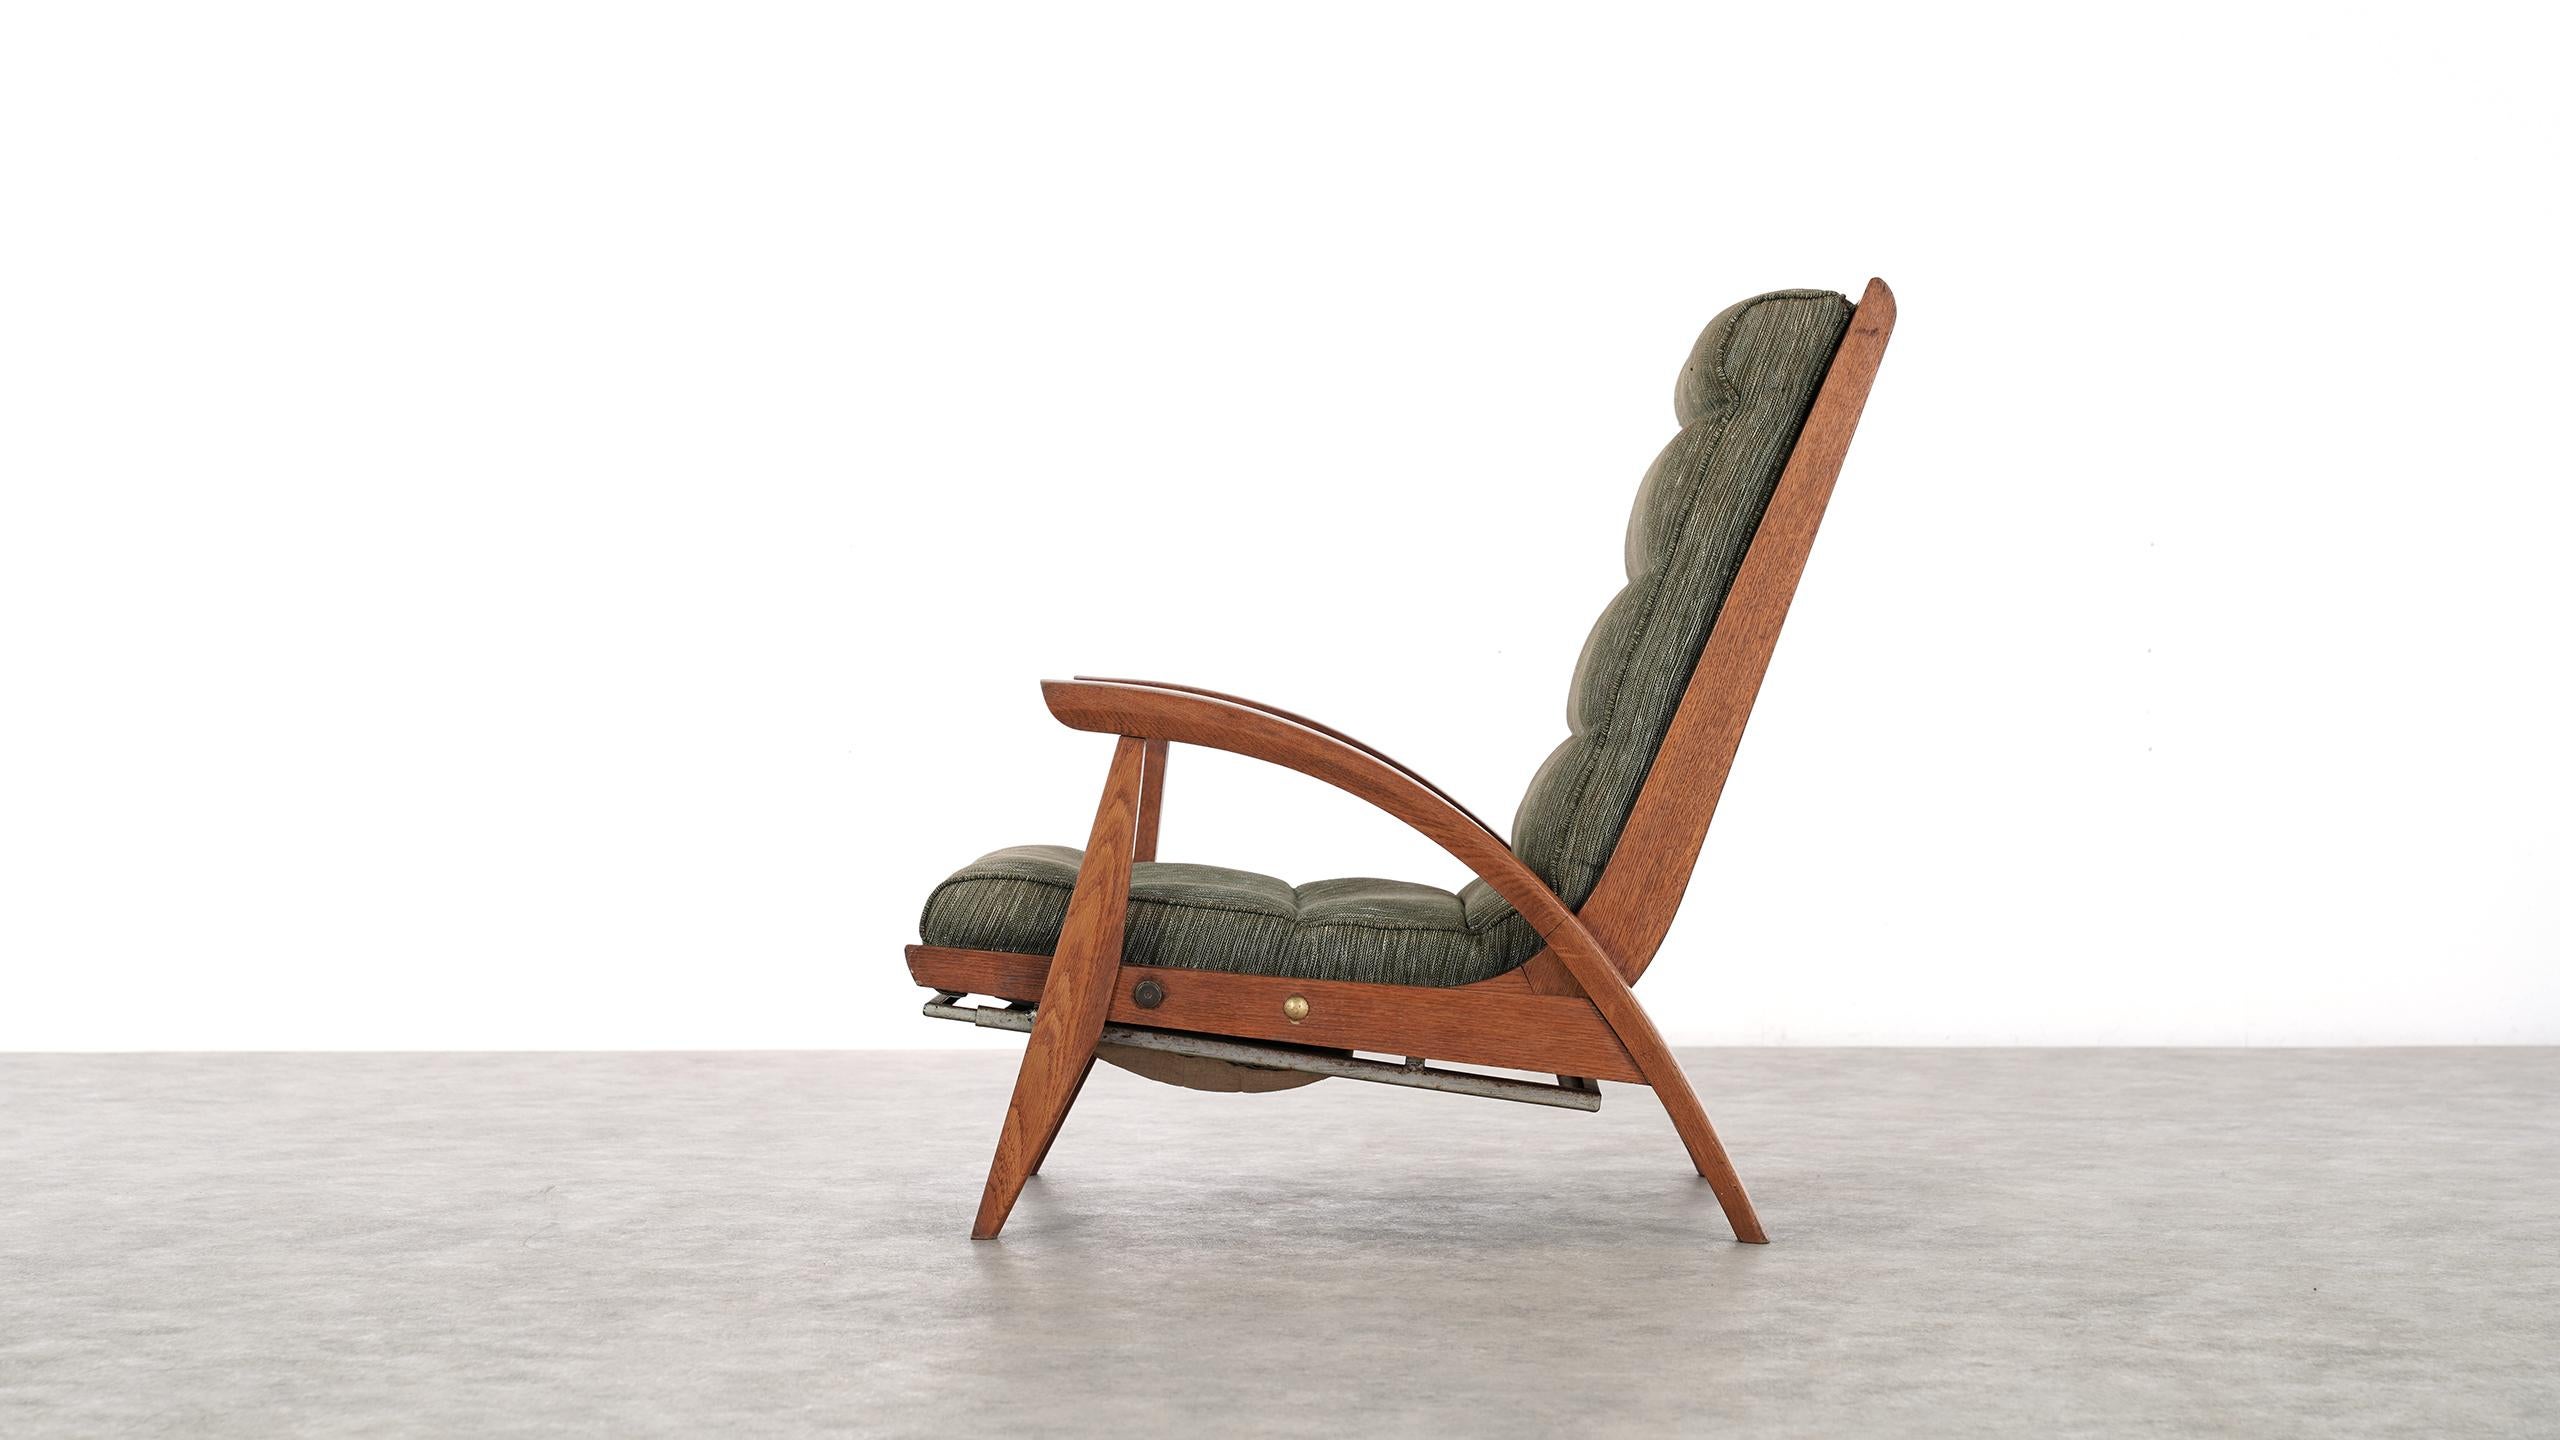 Mid-Century Modern Guy Besnard FS 134 Reclining Lounge Chair, 1954 for Free Span, France Prouvé